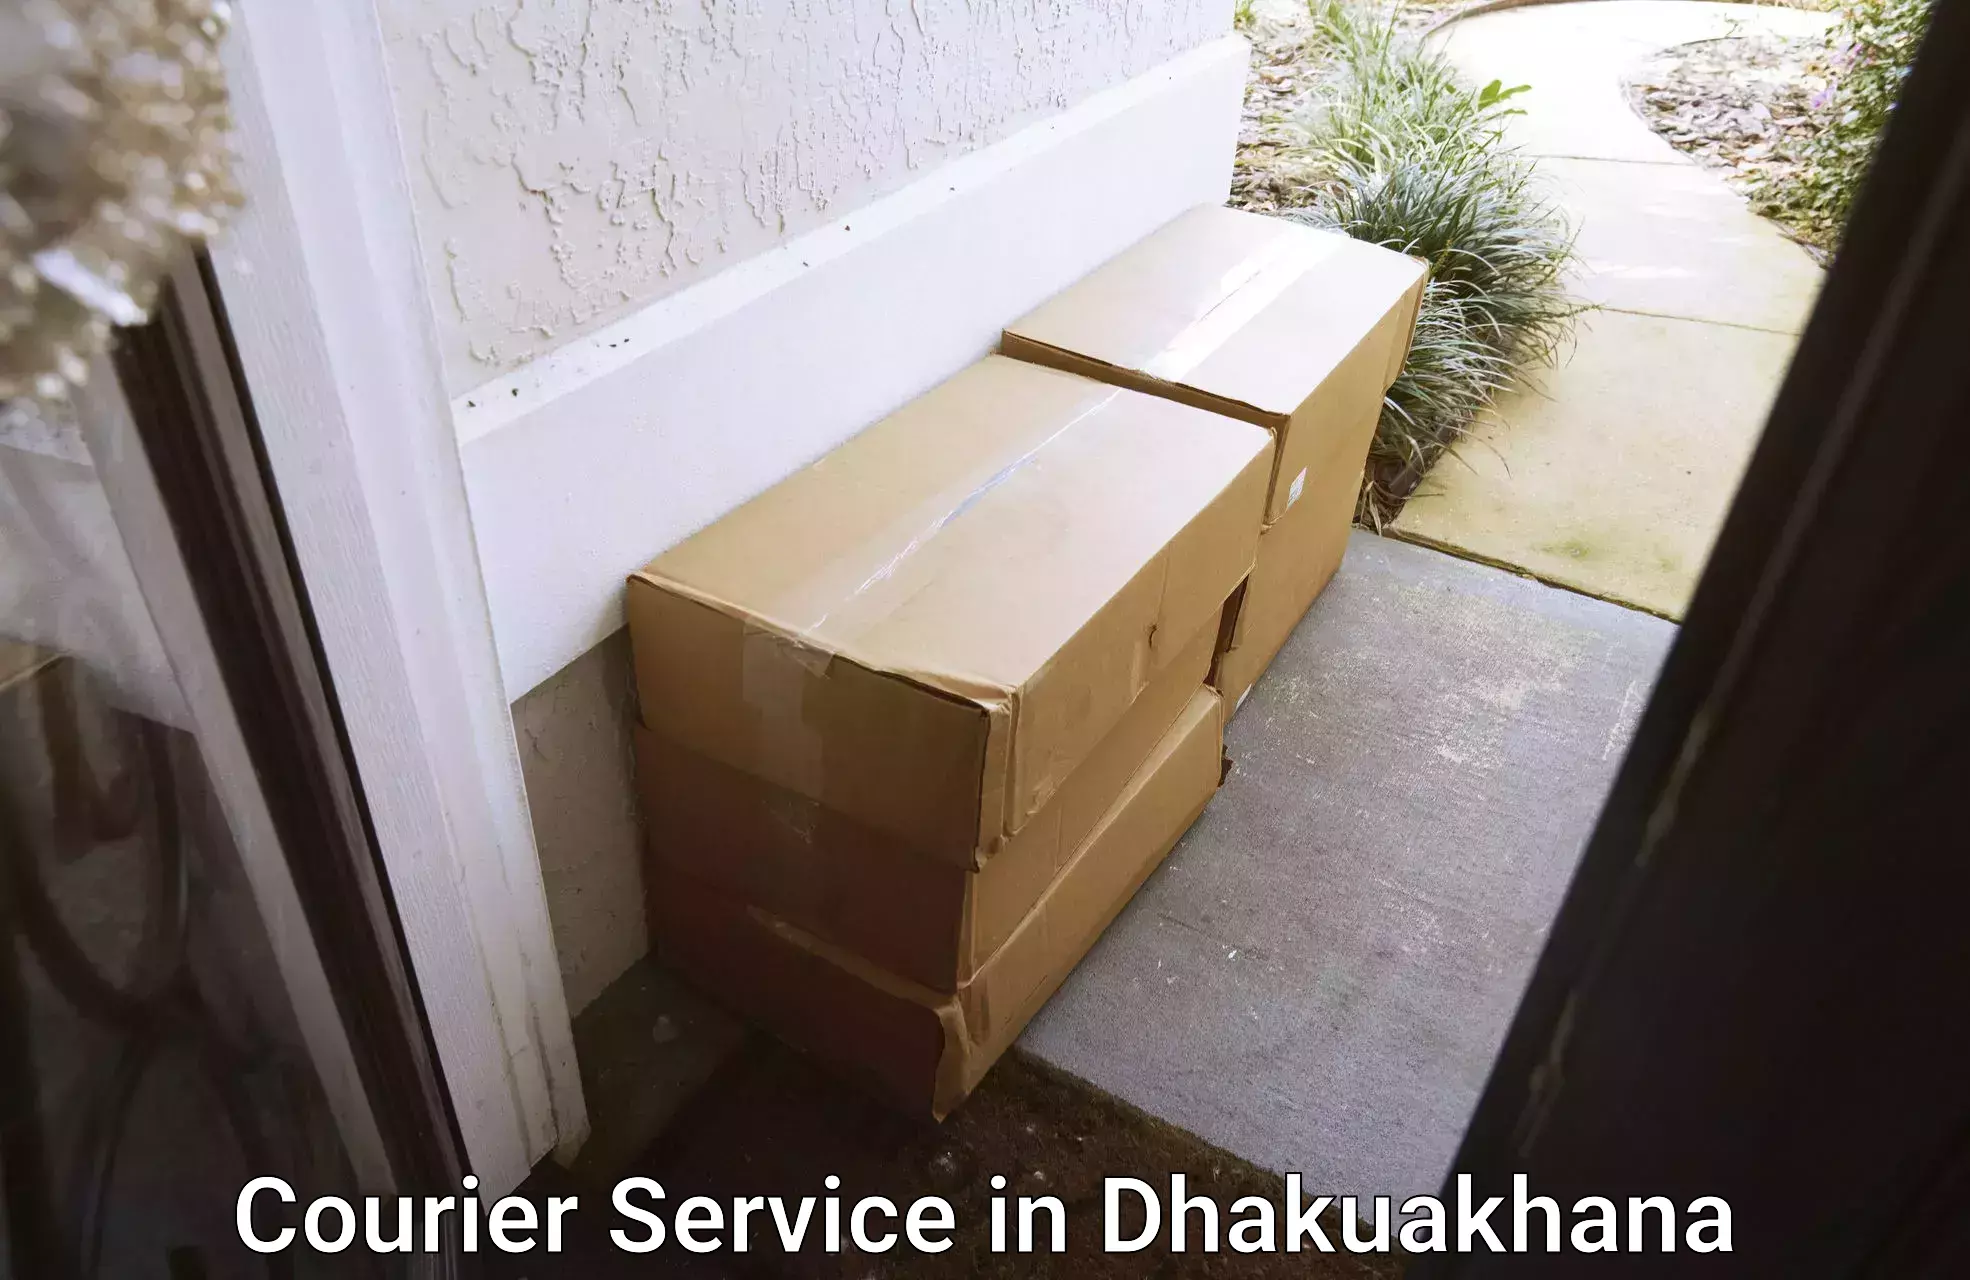 Round-the-clock parcel delivery in Dhakuakhana